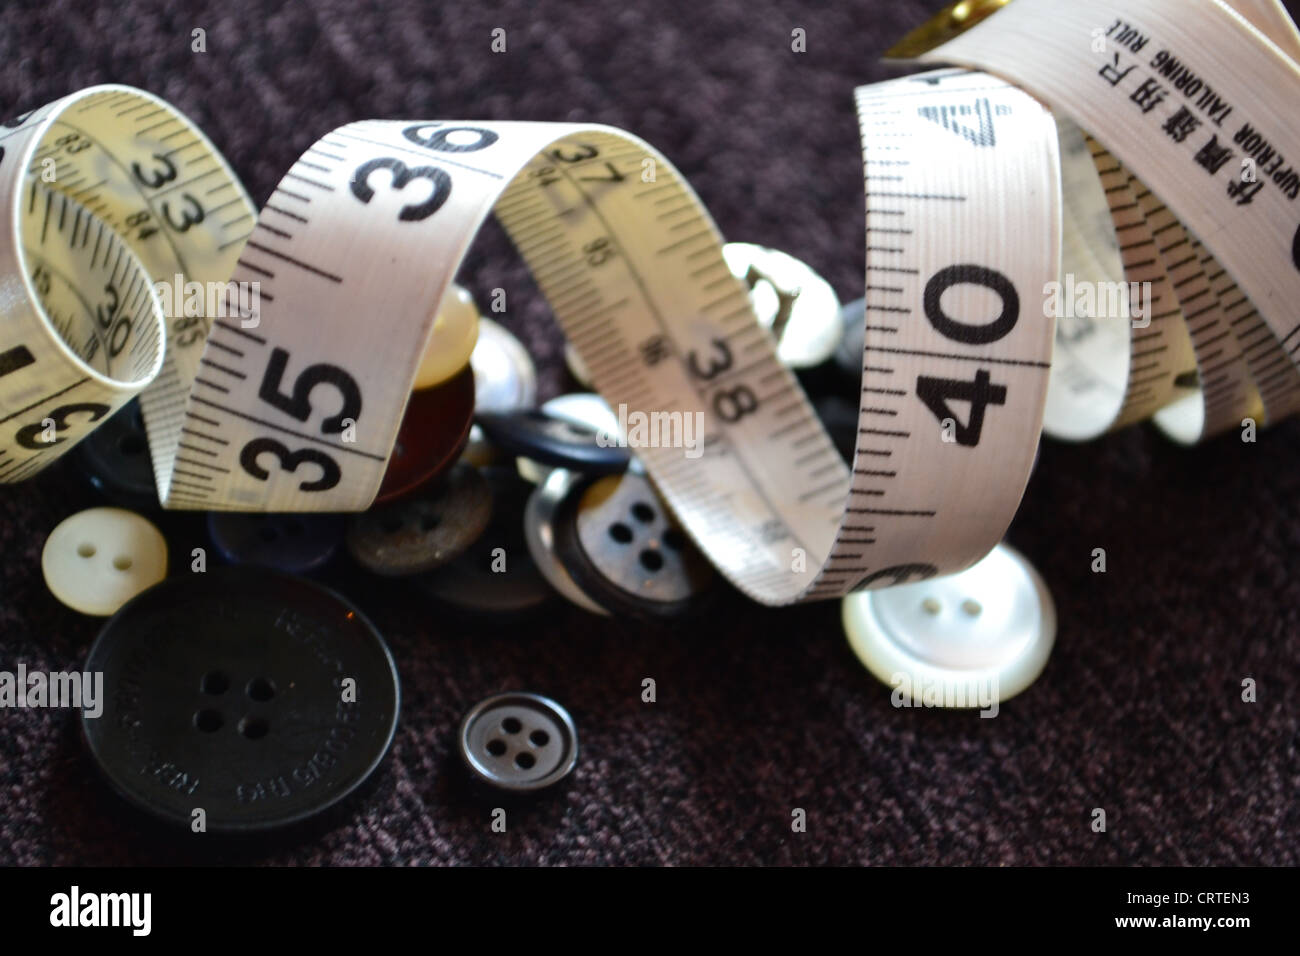 Tape measure and Buttons. Stock Photo